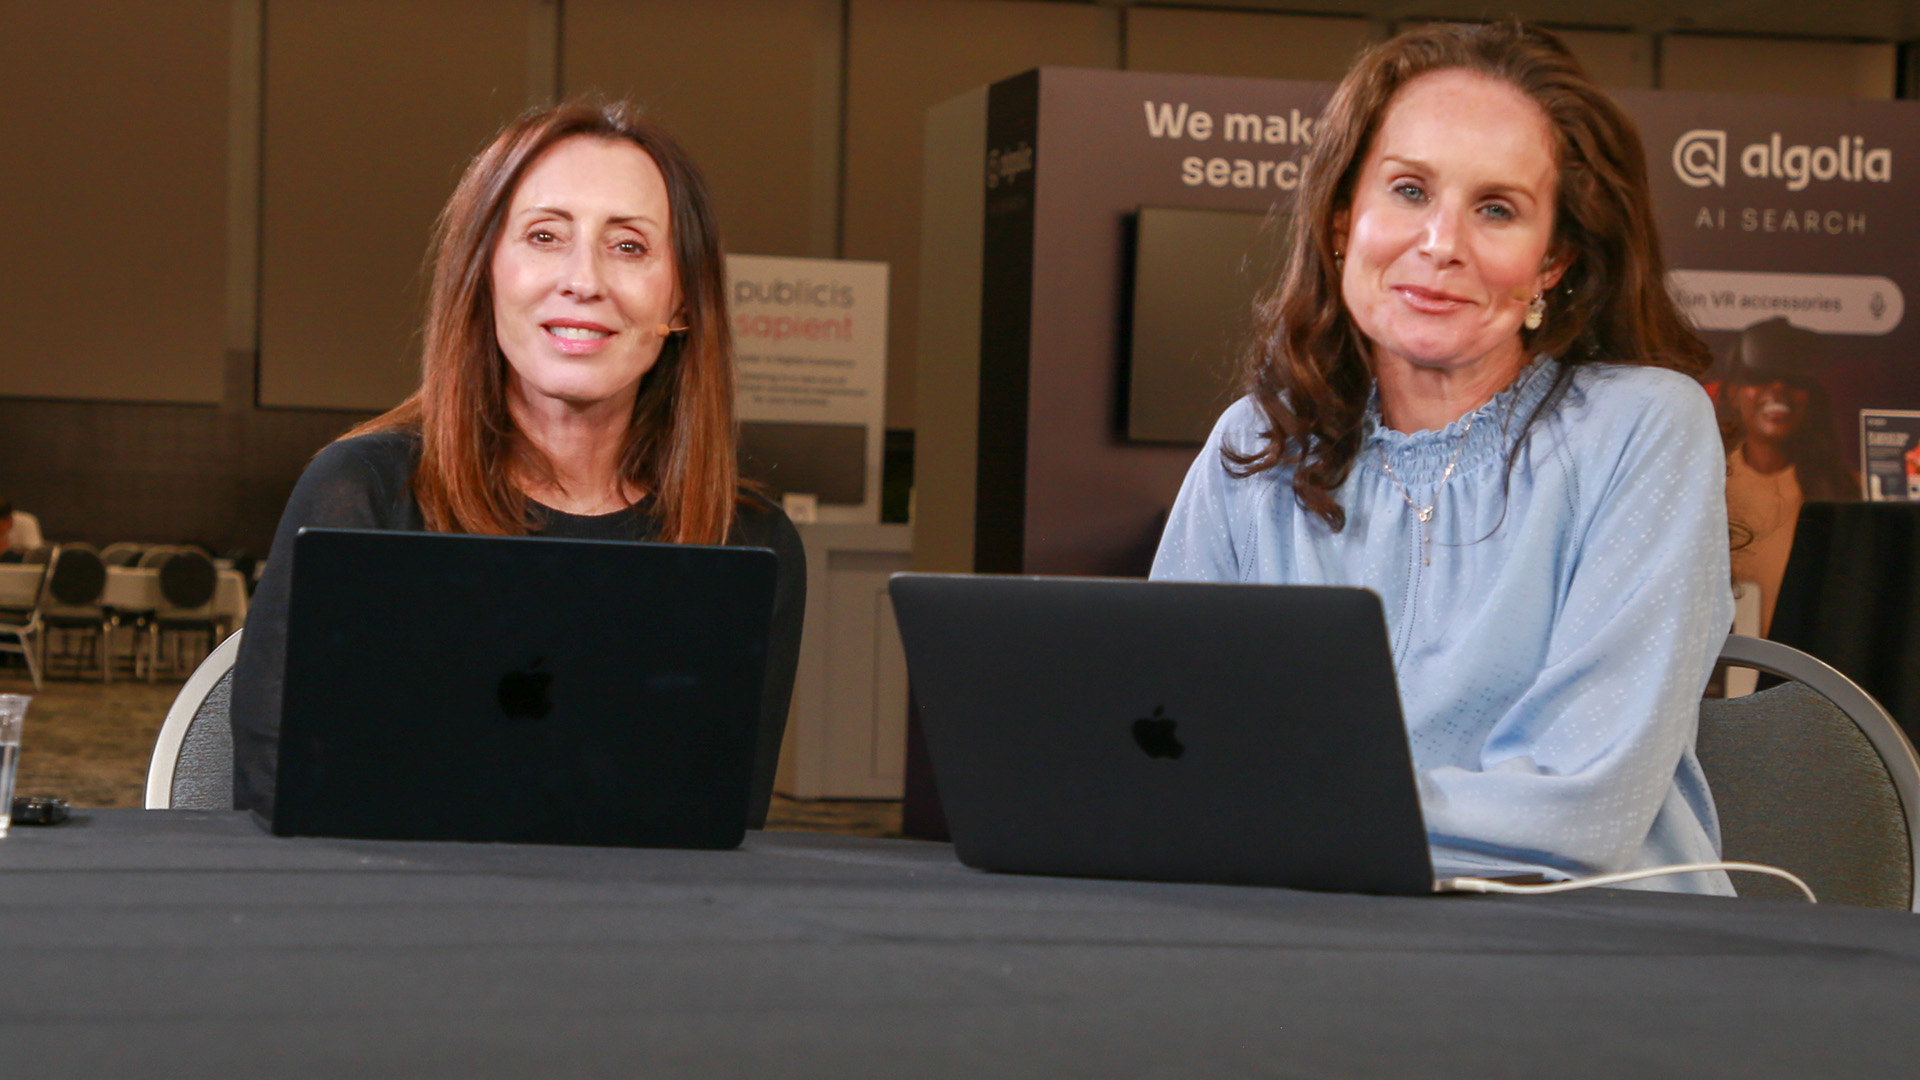 TheCUBE analysts Shelly Kramer and Rebecca Knight discuss the future of e-commerce, from improved customer experiences to industry partnerships.